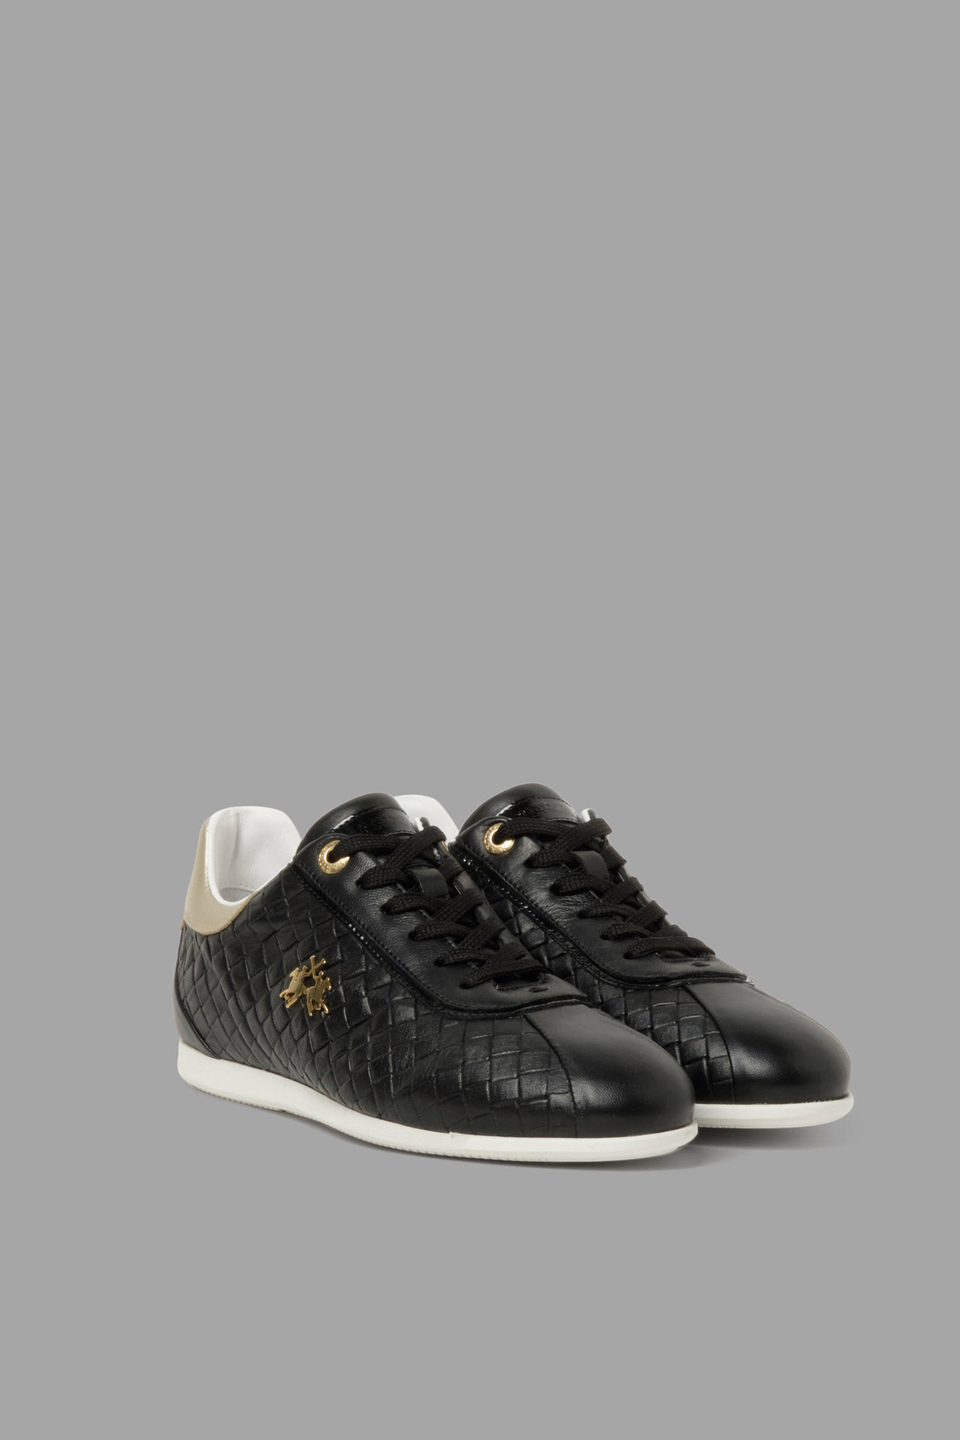 Woven leather sneakers | La Martina - Official Online Shop